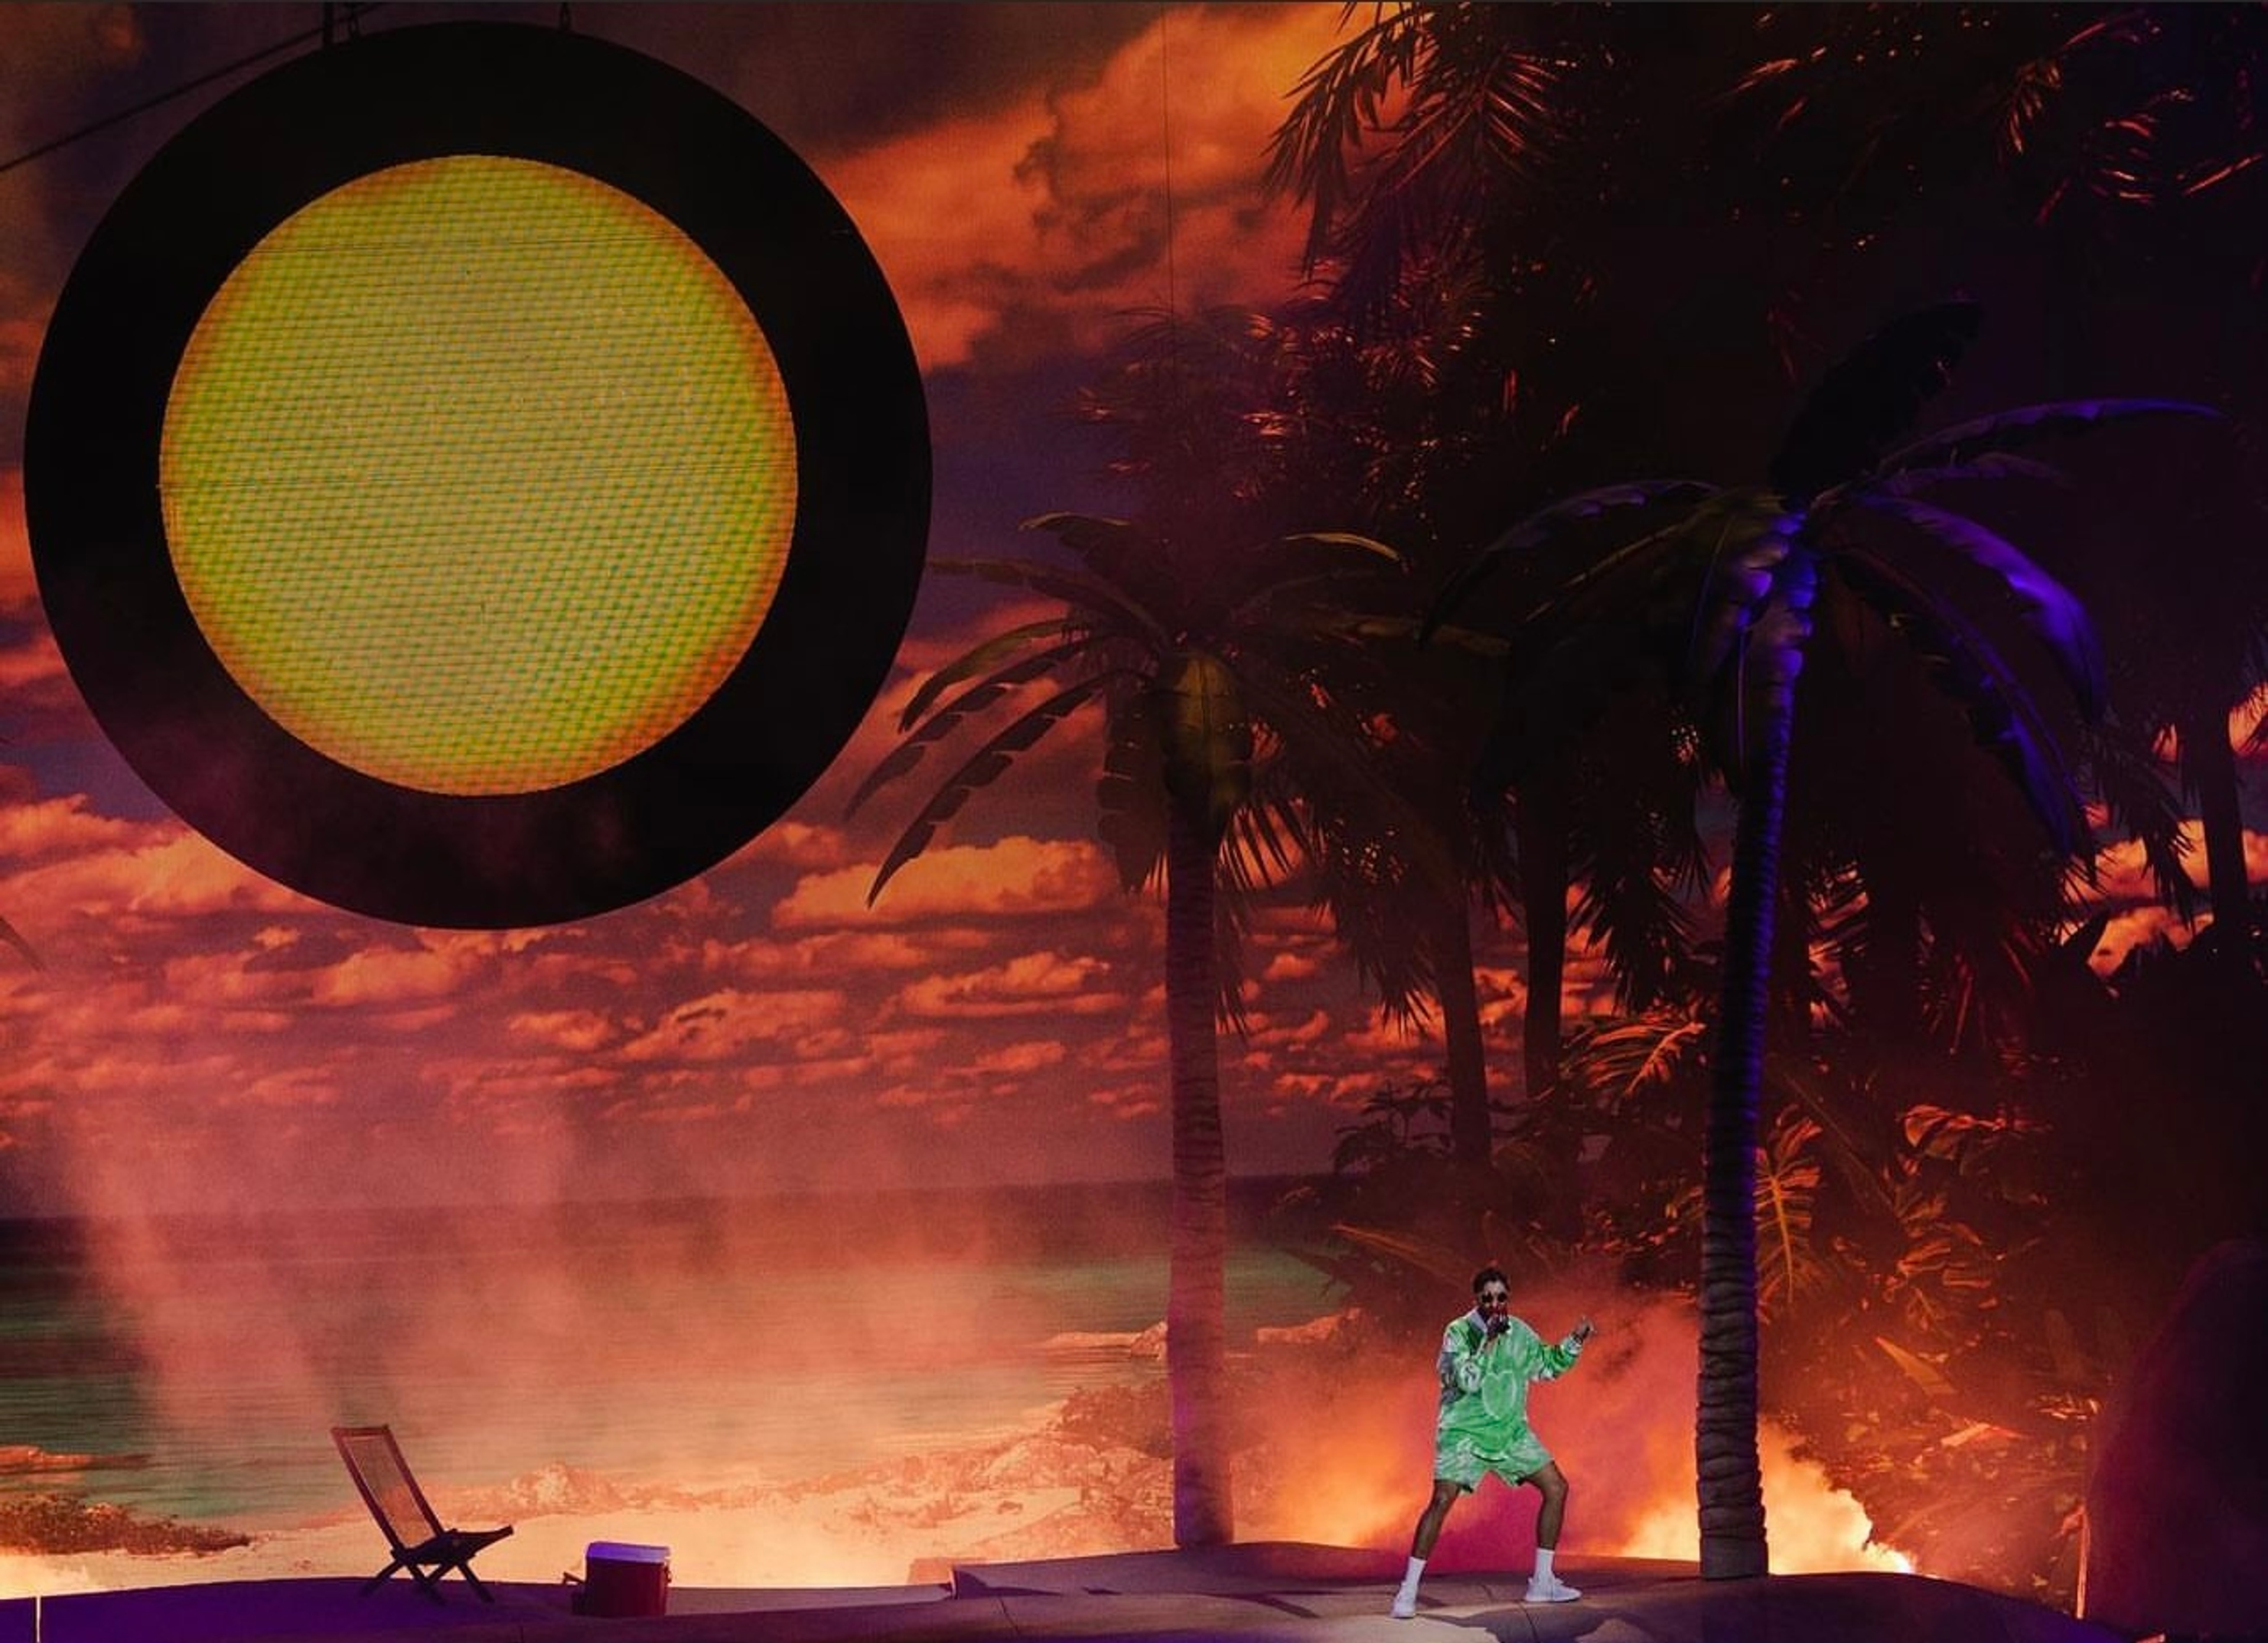 Bad Bunny performing on stage with palm tree and beach setup behind him